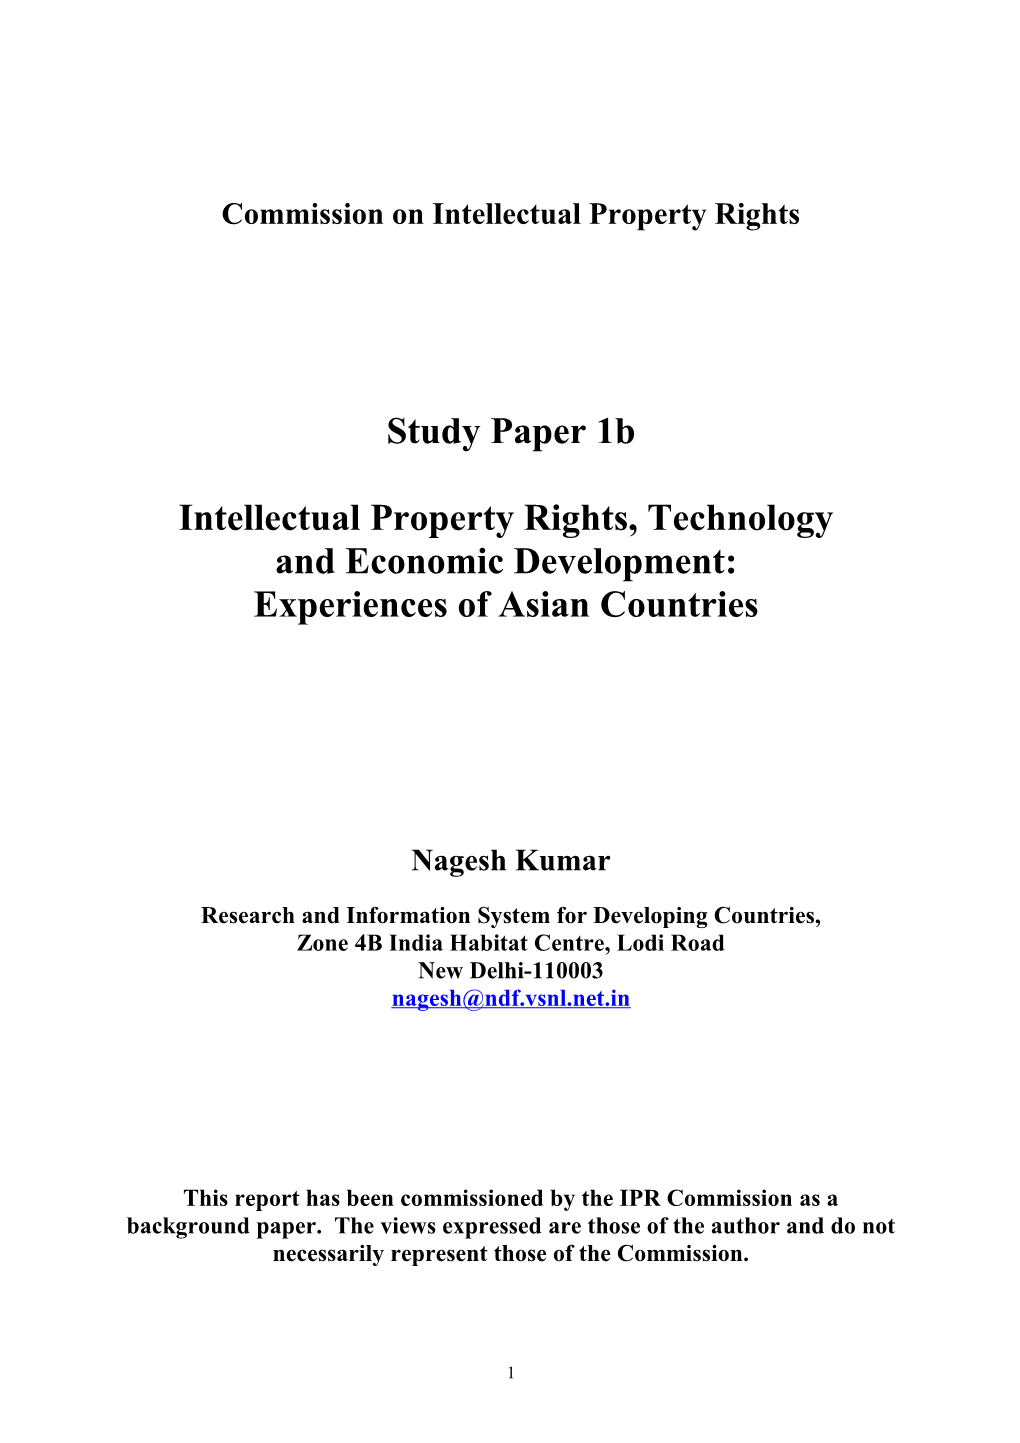 Iprs, Technology and Development